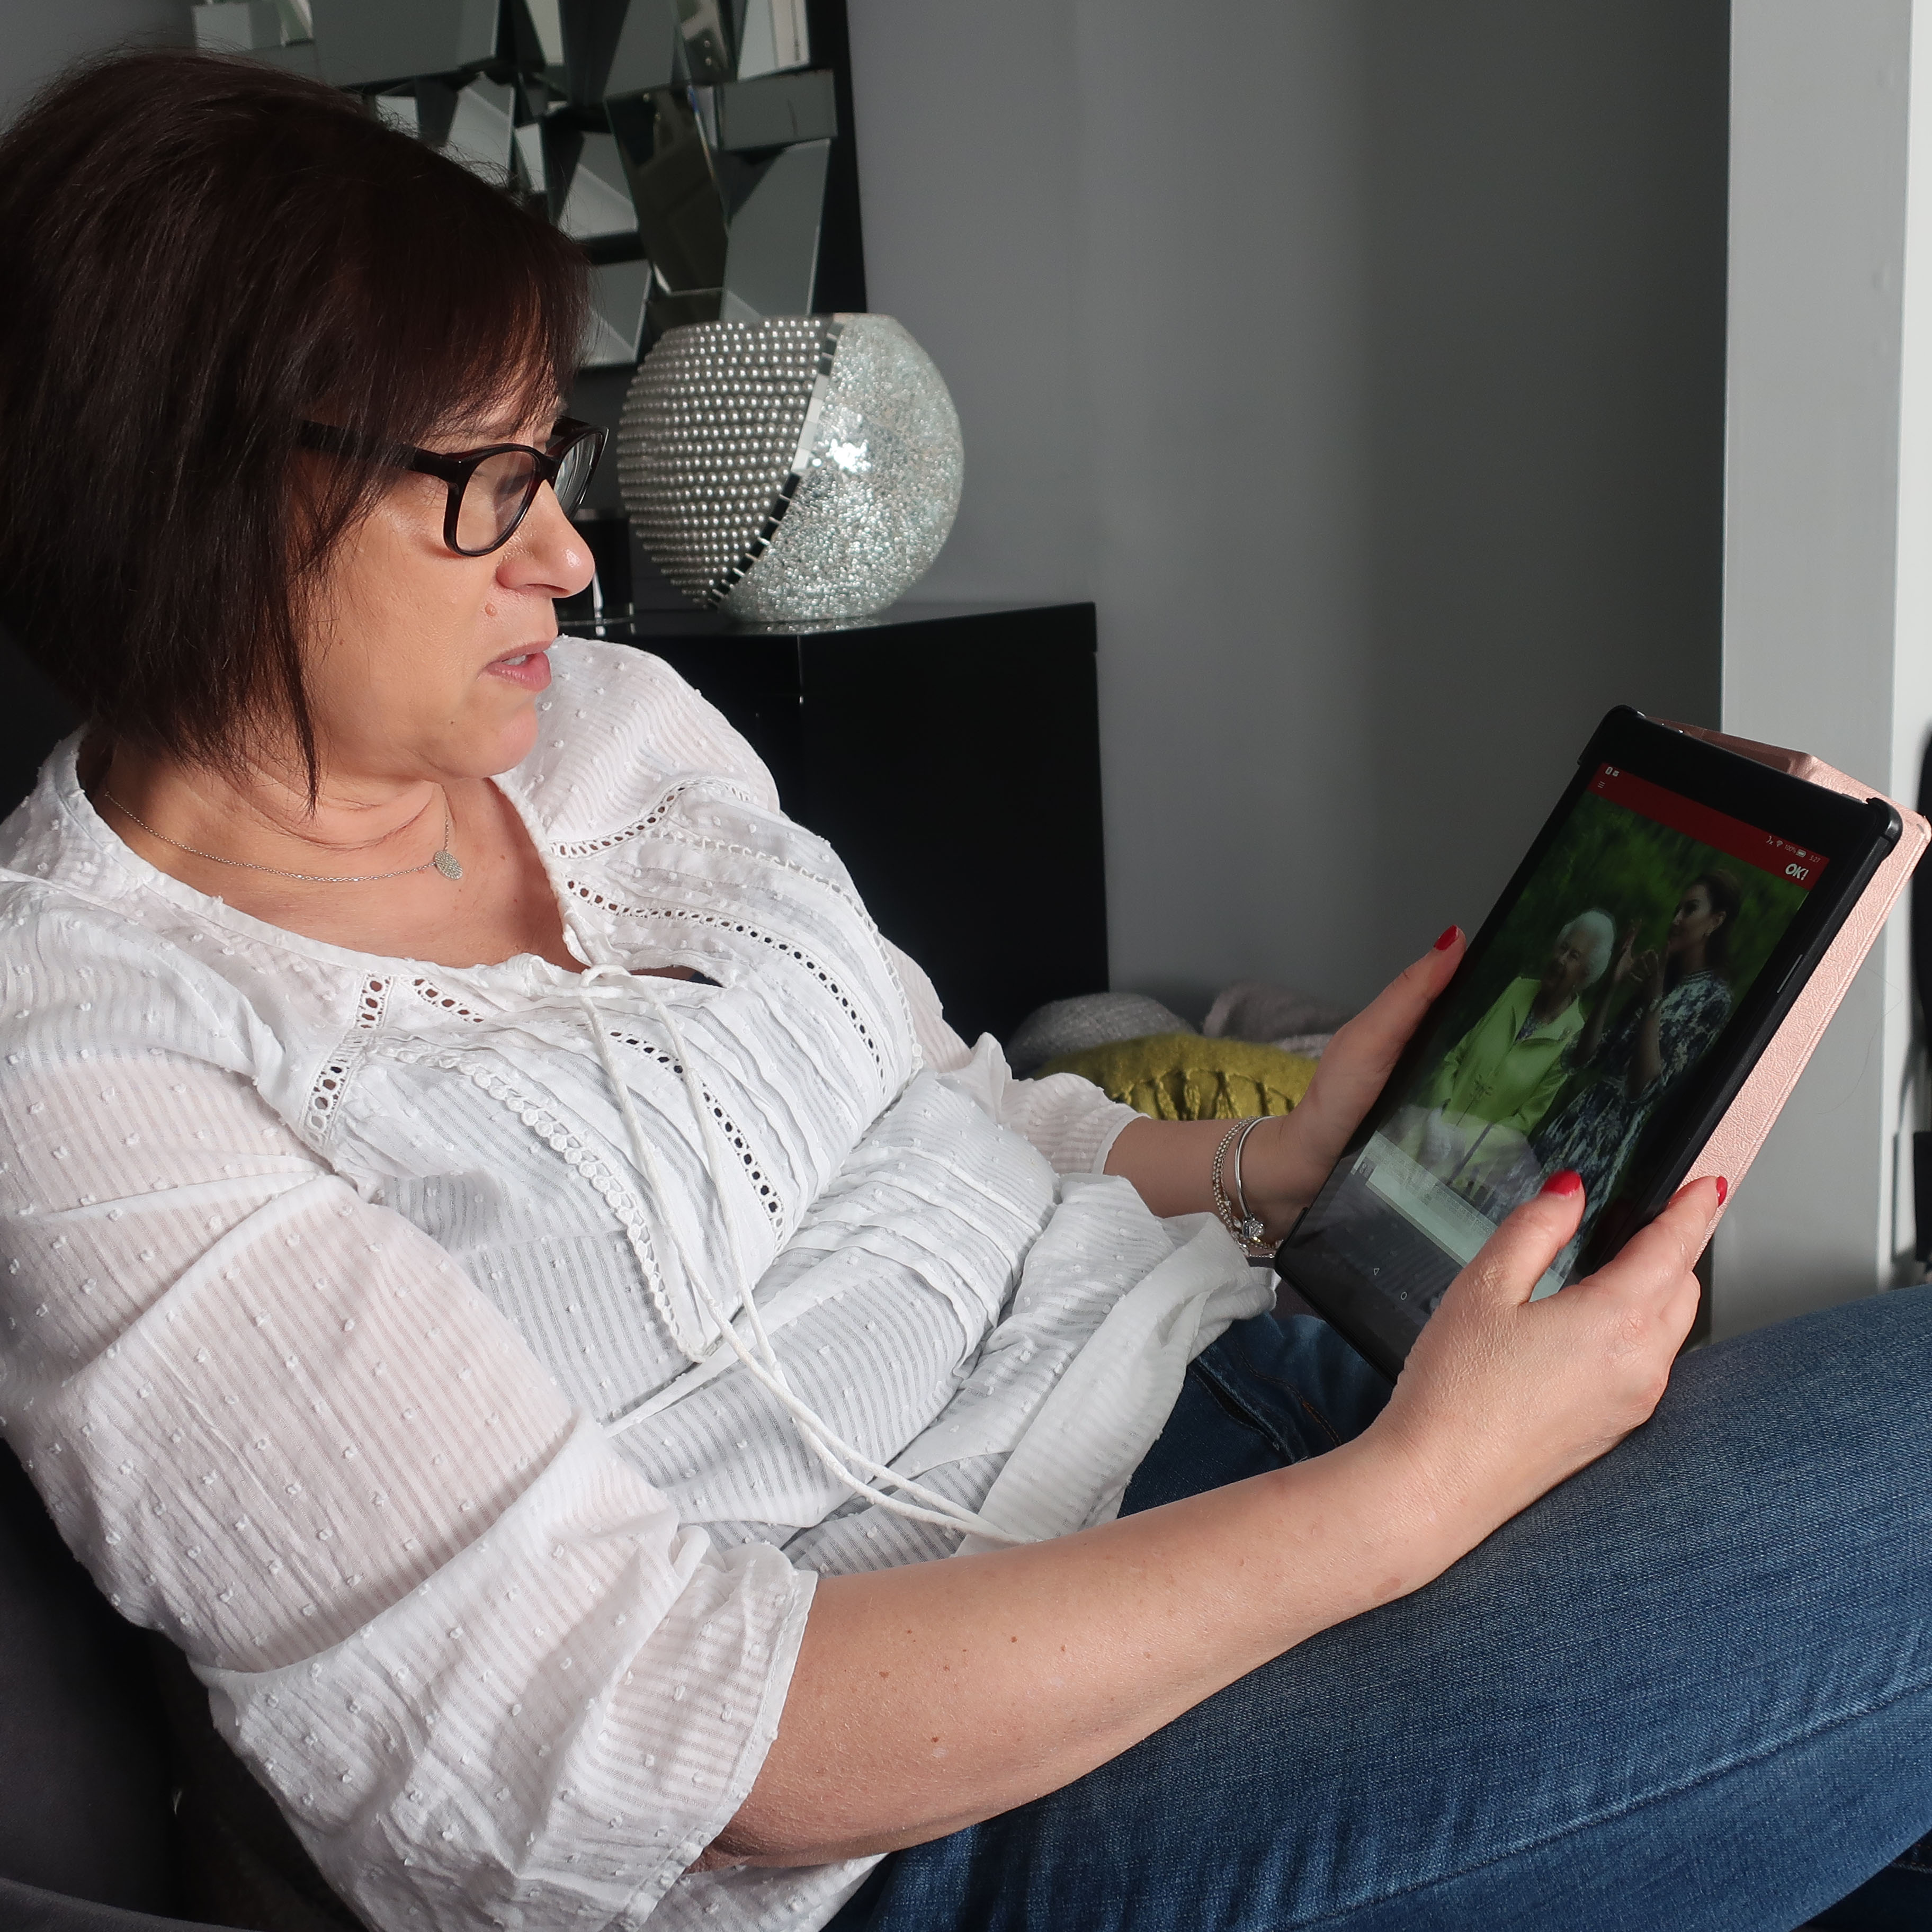 A woman reading BBC News on a tablet device.